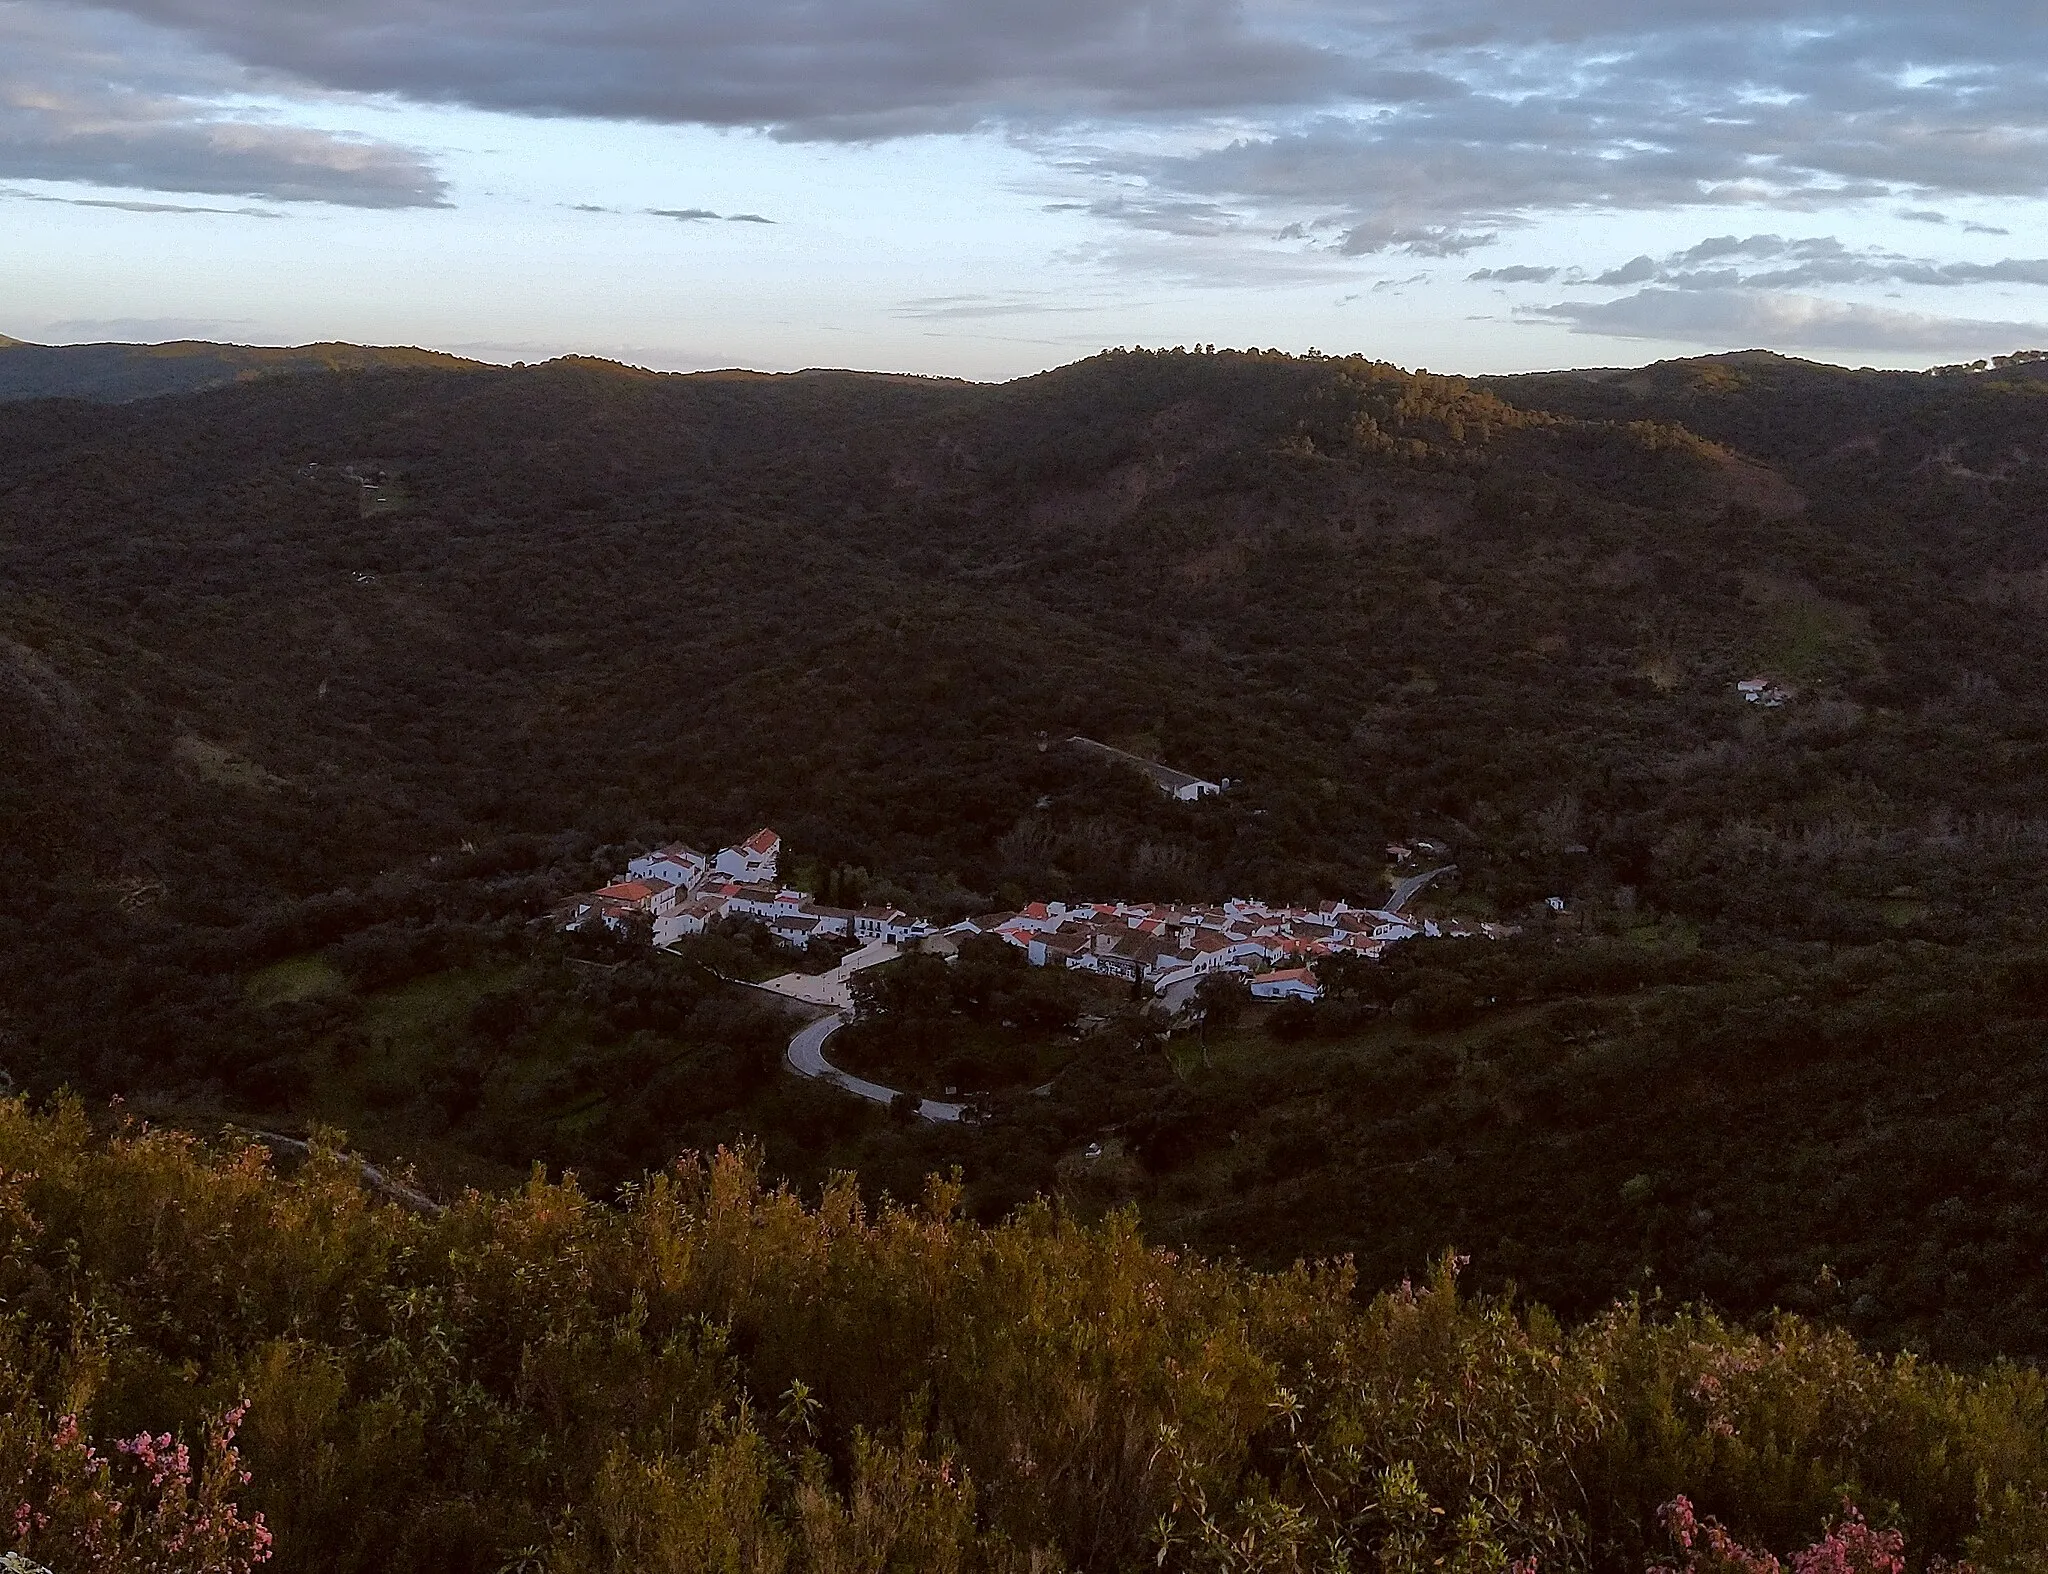 Photo showing: A view of Carboneras, a hamlet in Aracena (Huelva), seen from a nearby hill. The picture shows a top view of the hamlet and its surroundings, right after the sunset.